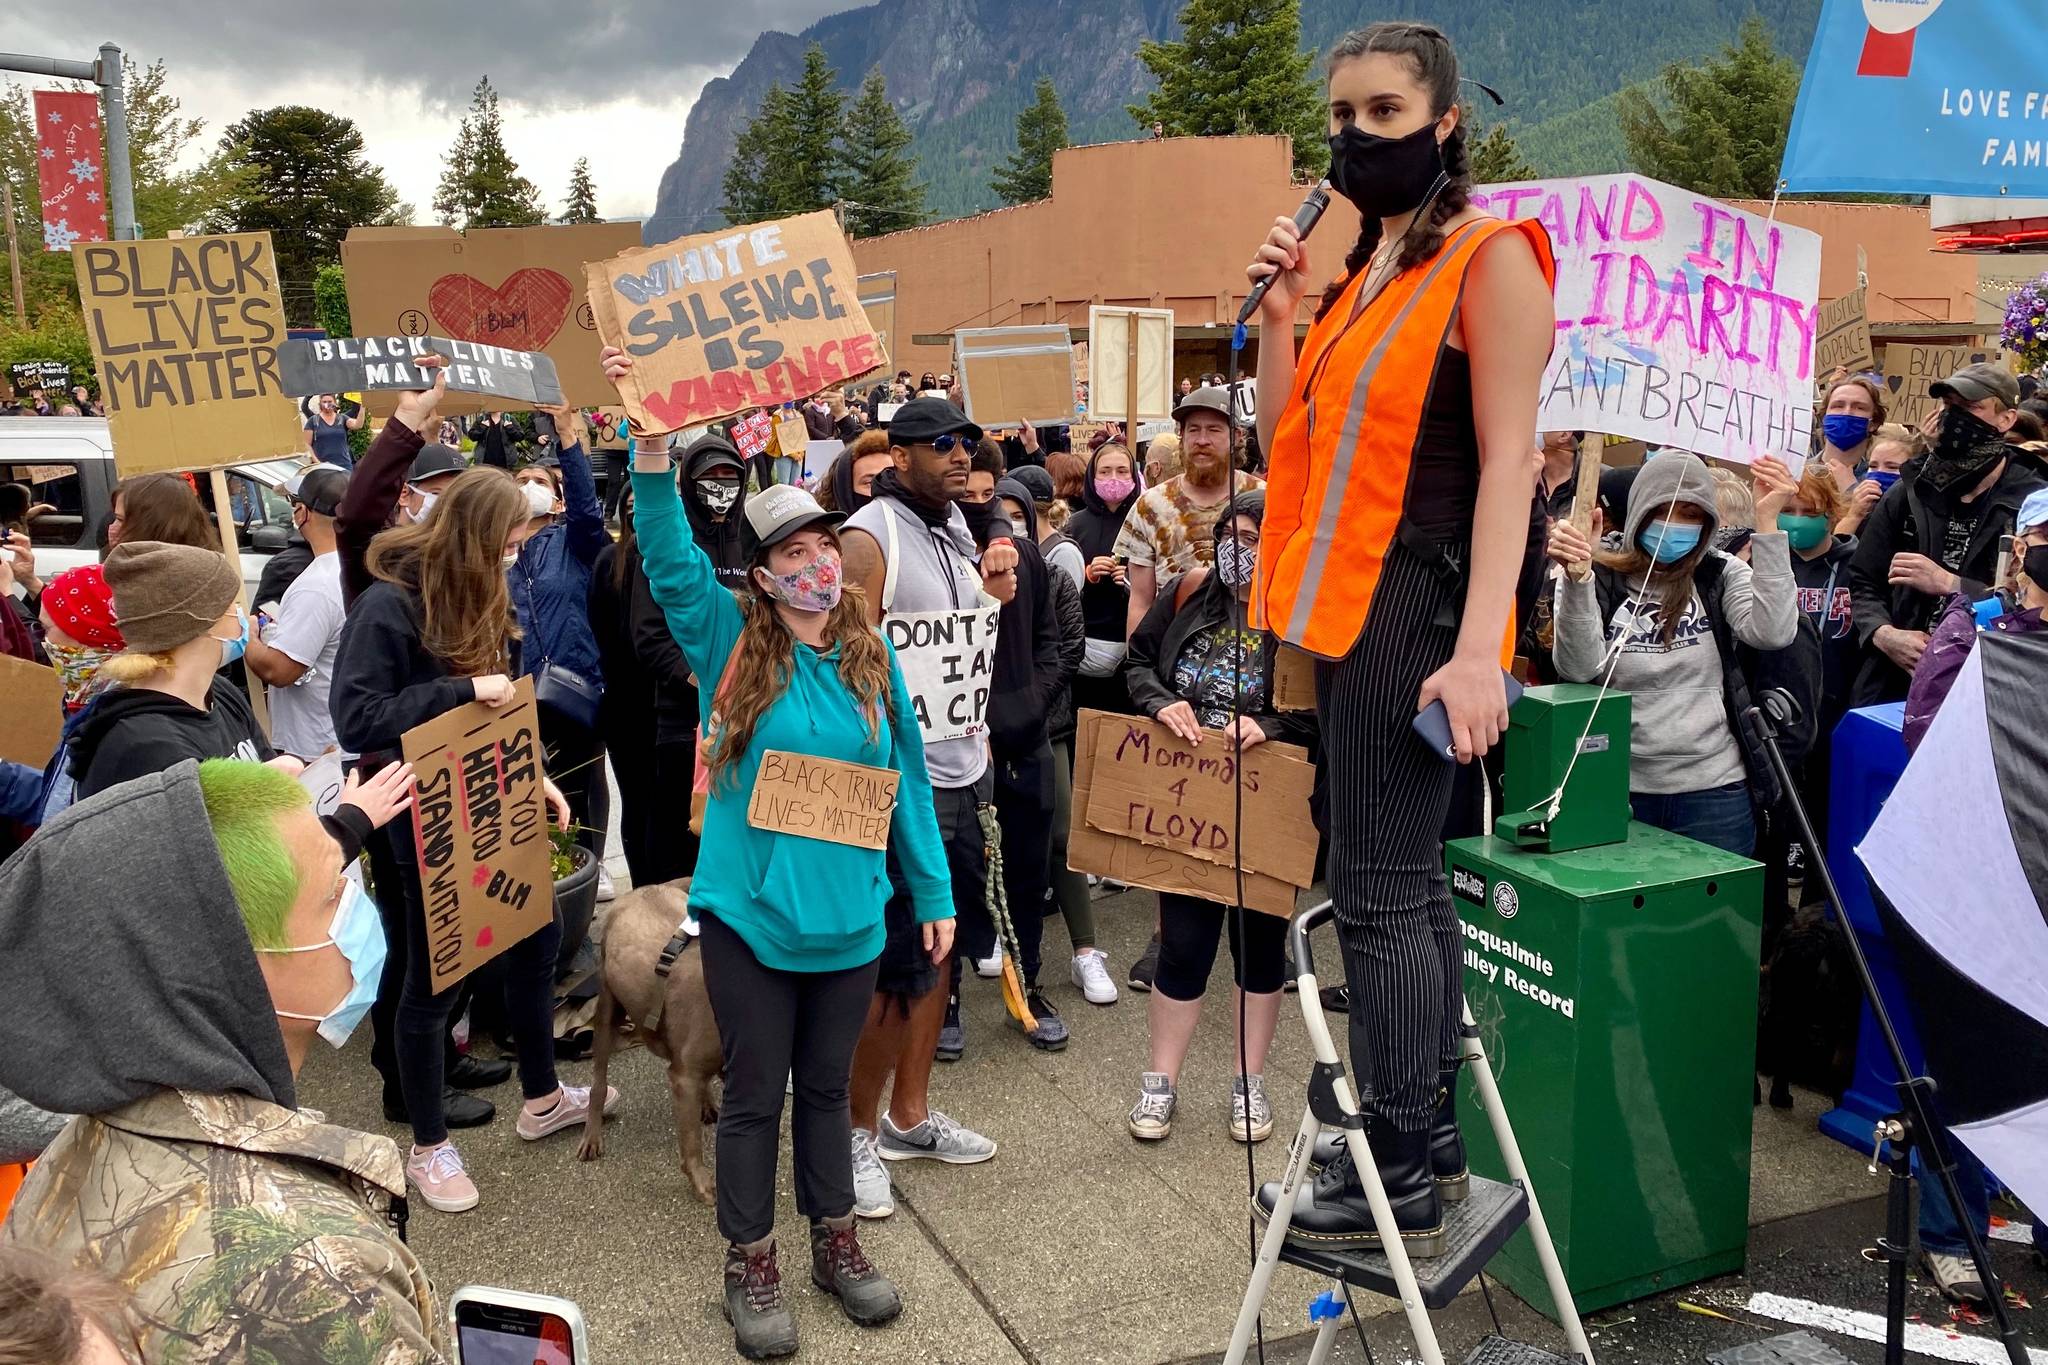 How a man from California caused a false Antifa scare in North Bend